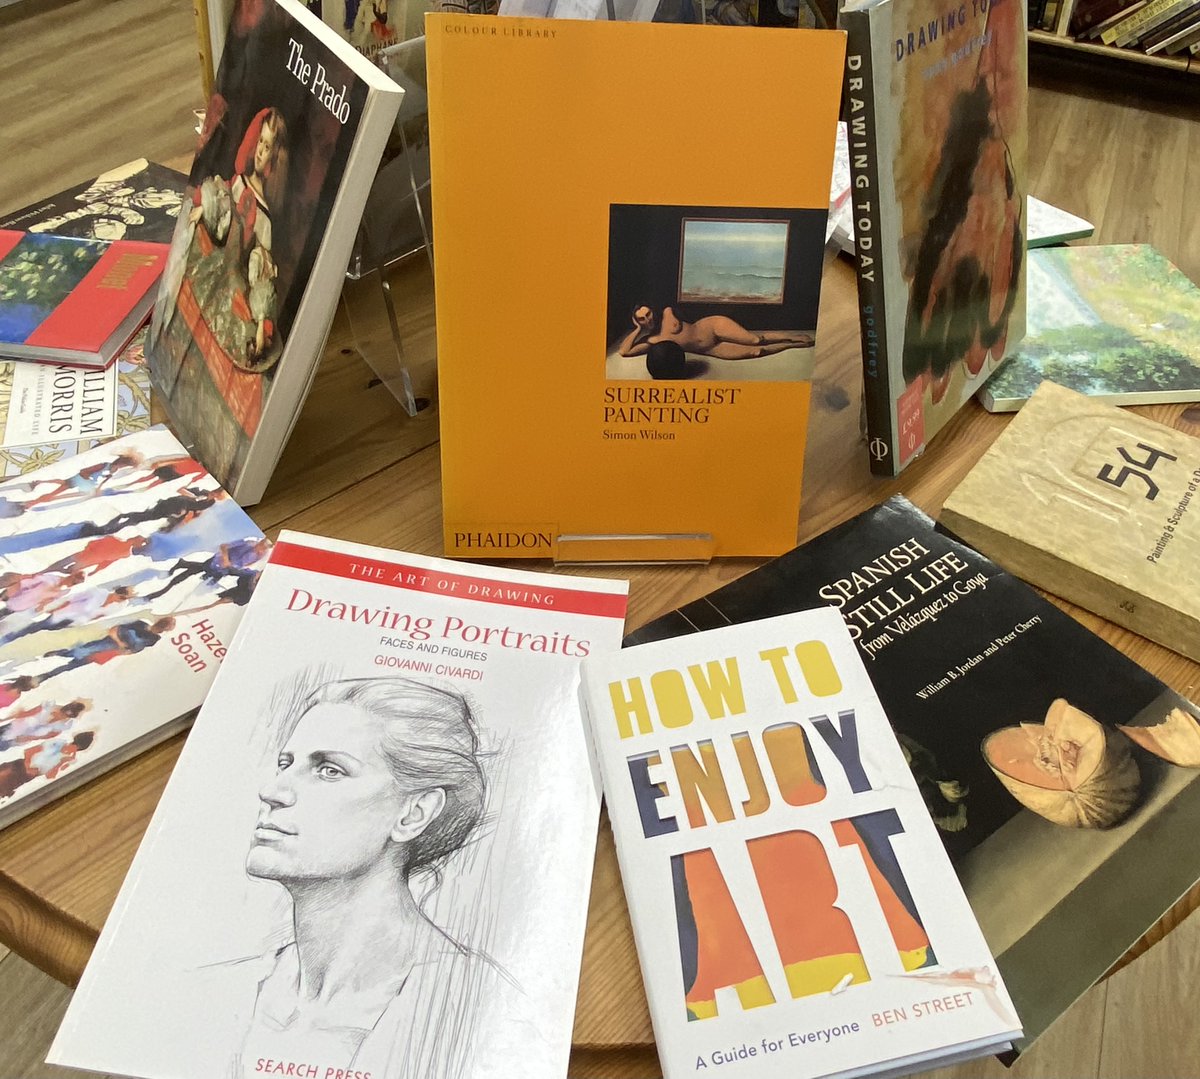 The Round Table display @StAOxfamBooks, as well as the window display, features #art and #artists - drop in and take a look! Catherine Street, 9am-5pm daily, 'cept Sundays (noon-4pm). #books #vinyl #CDs #DVDs #sheetmusic ... and much more!